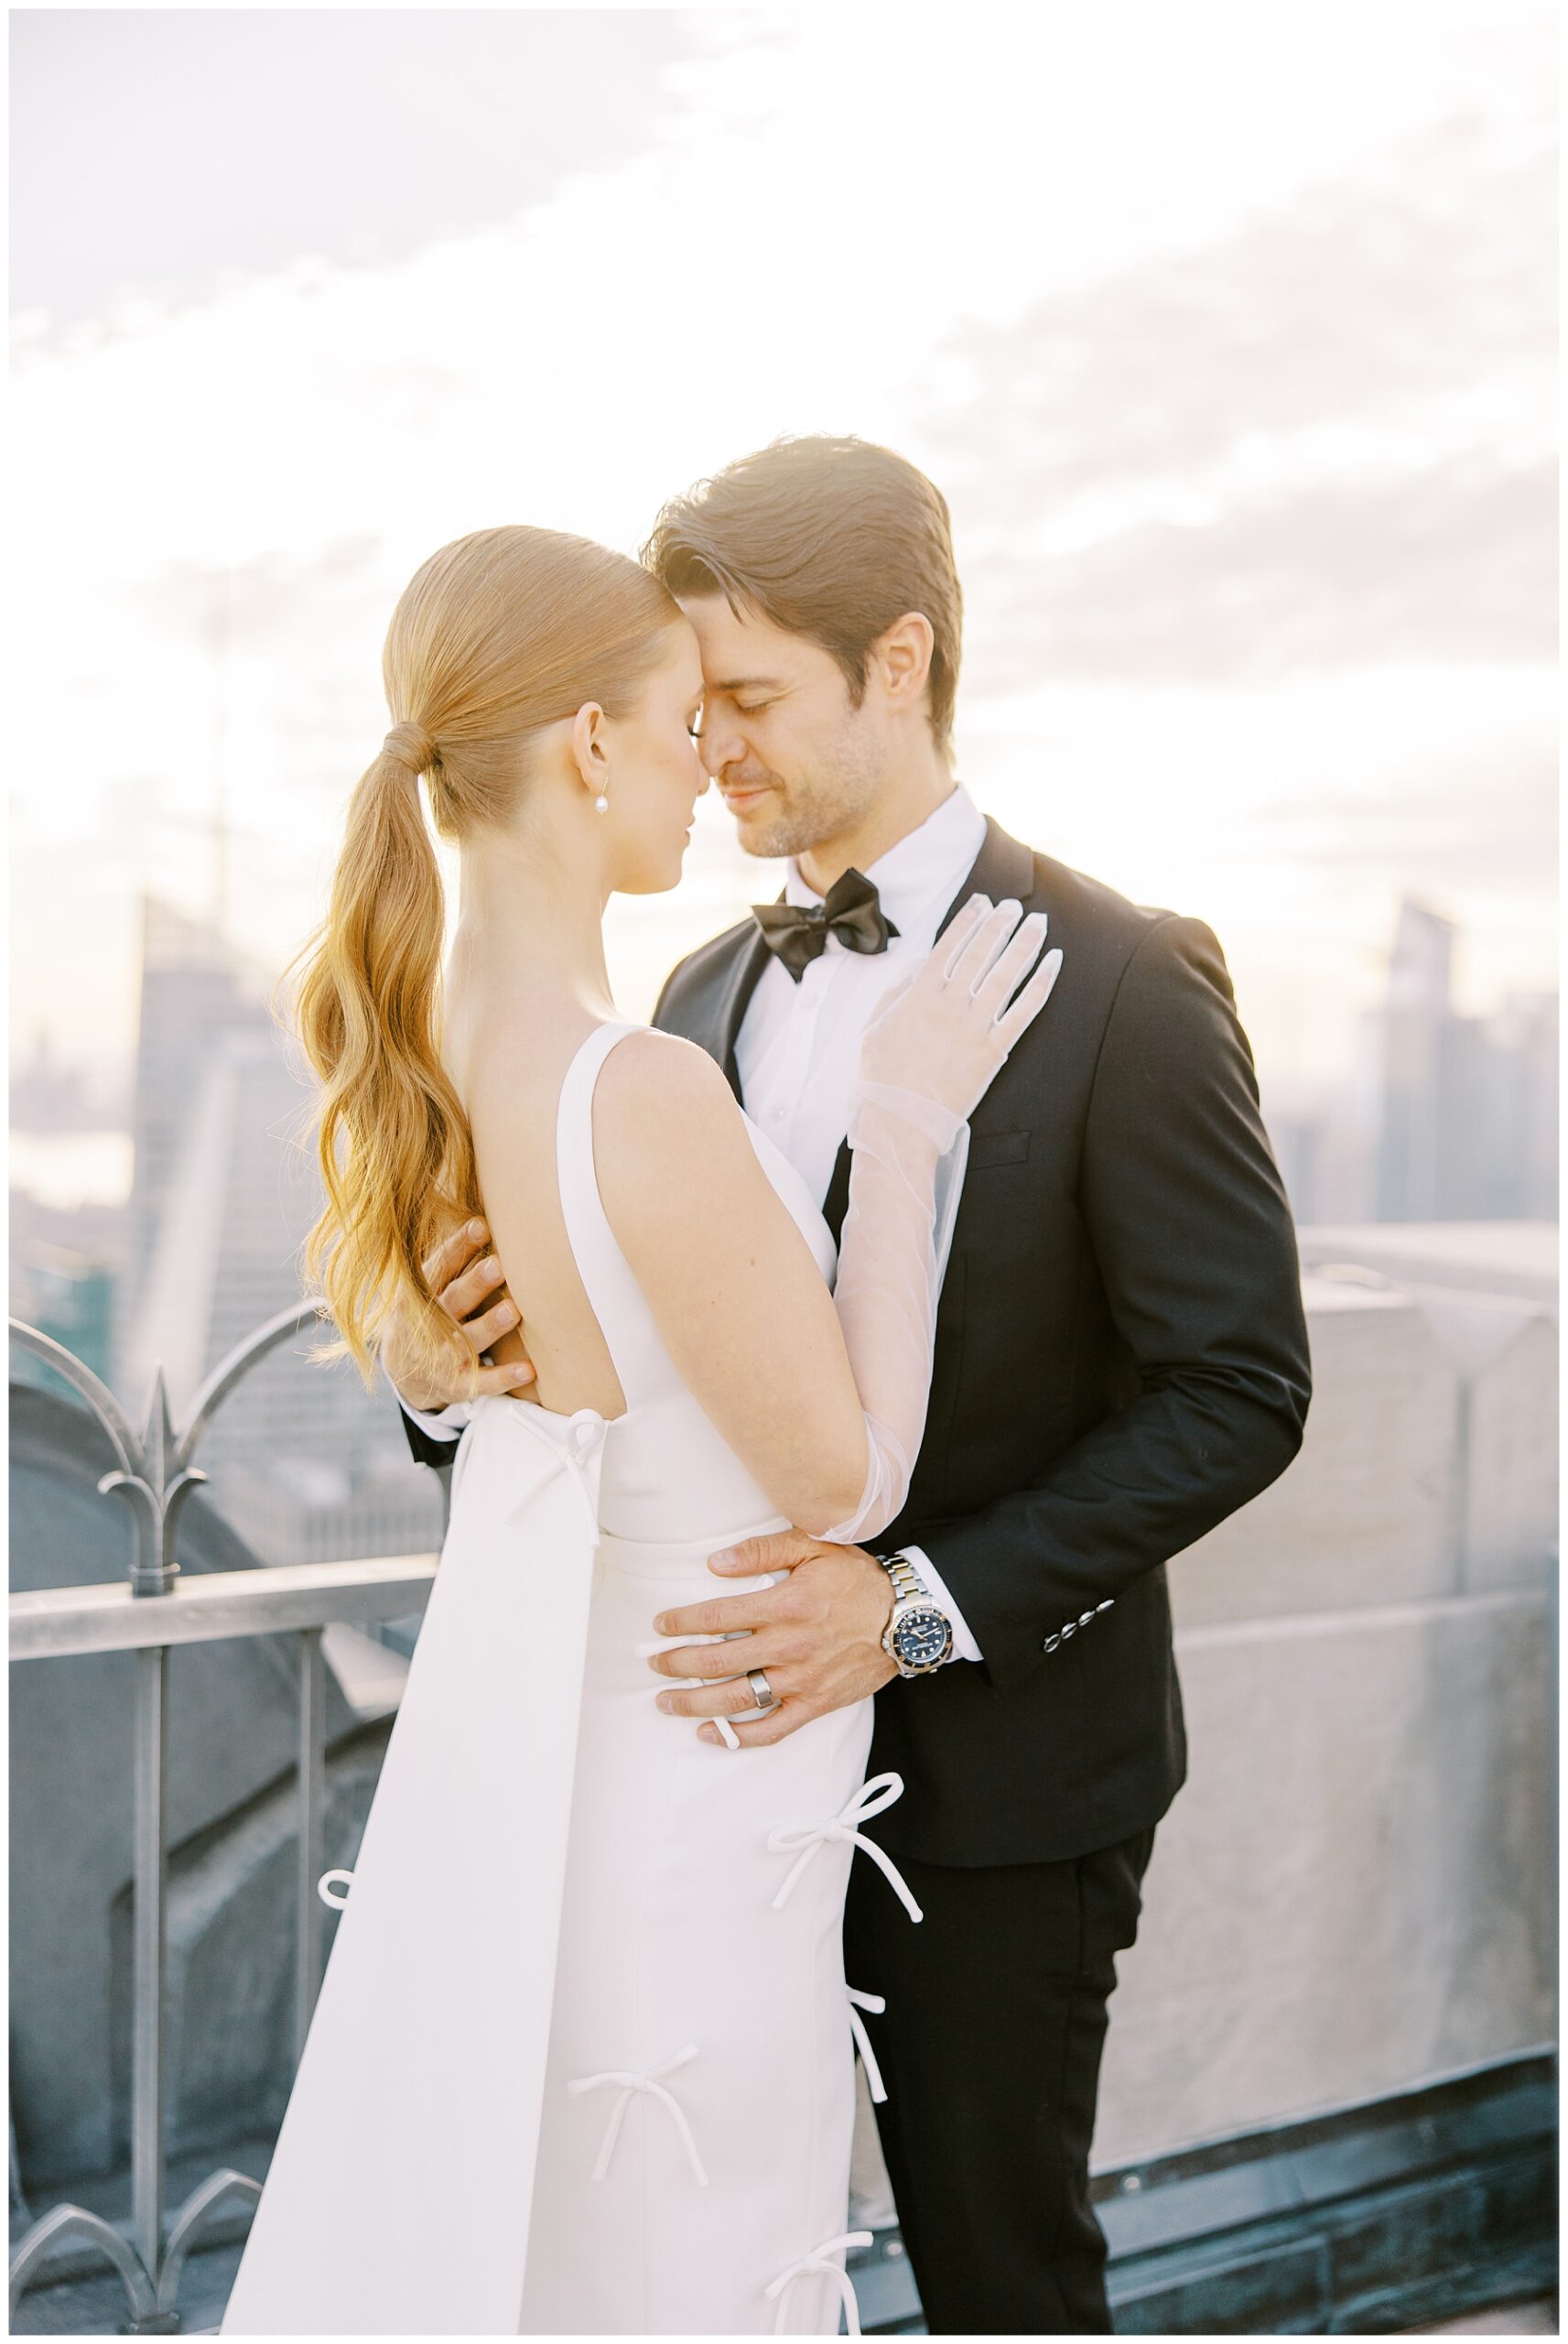 romantic wedding portaits from Top of the Rock in NYC